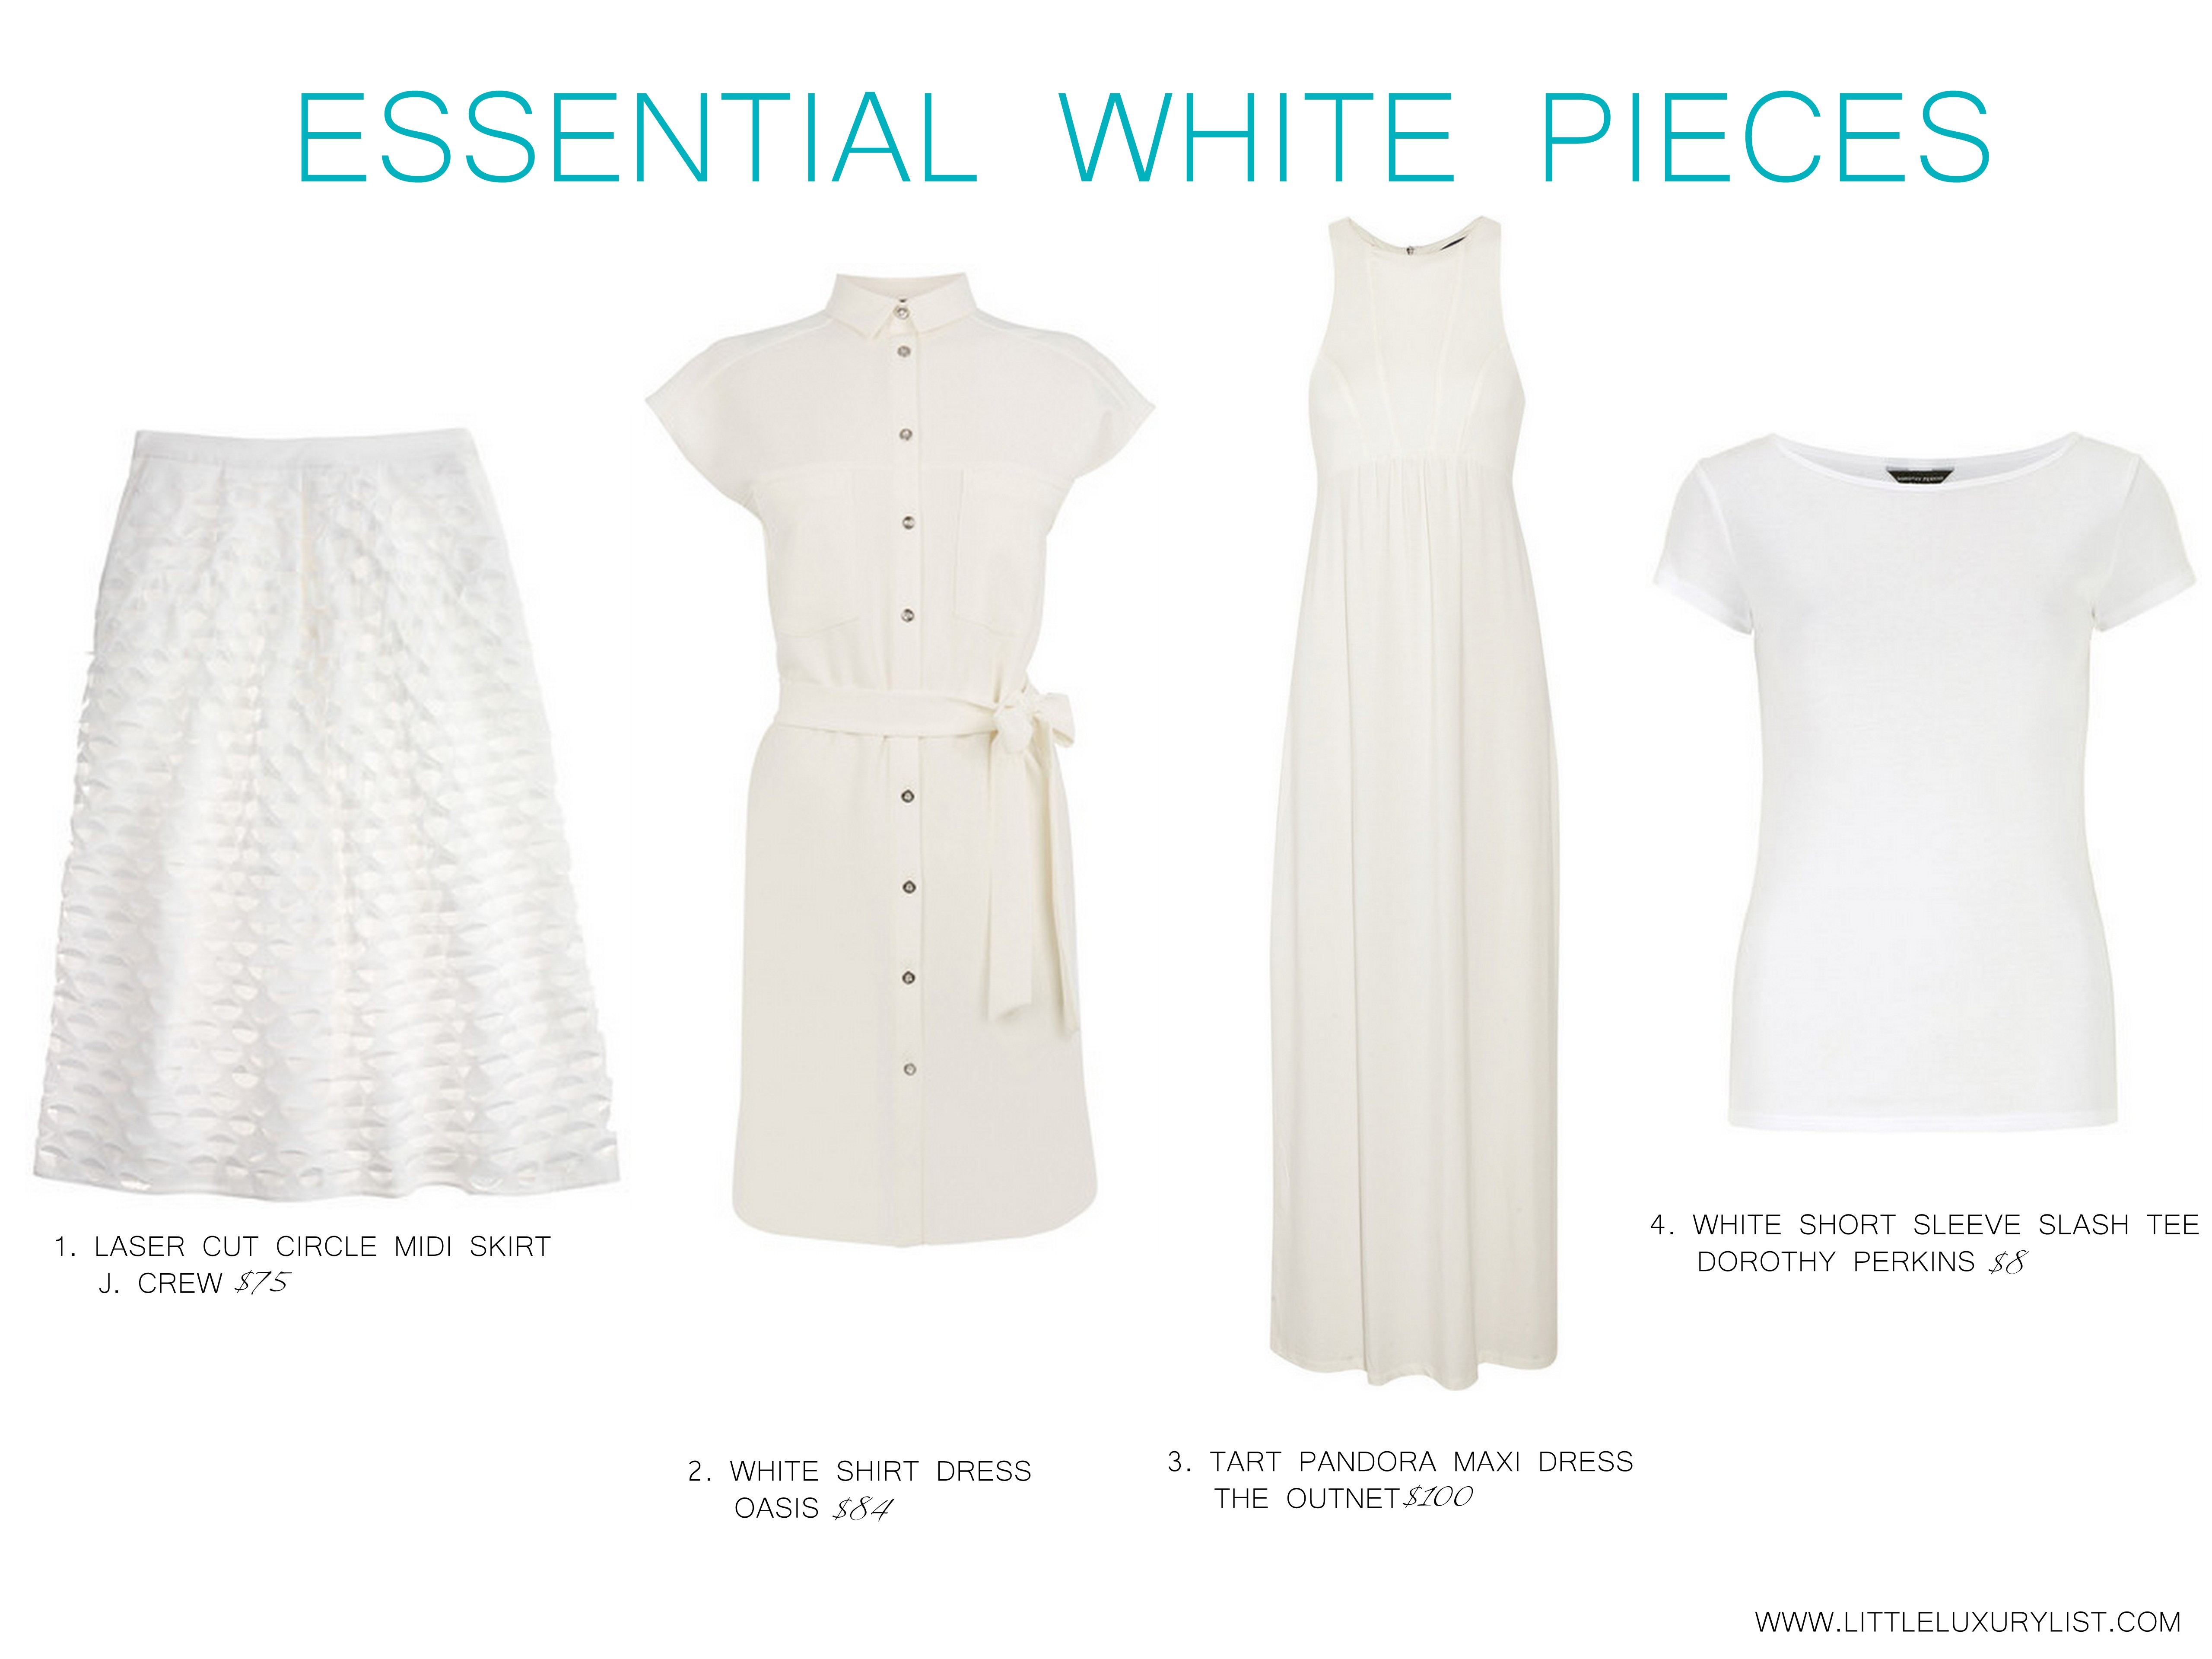 Essential White pieces by little luxury list